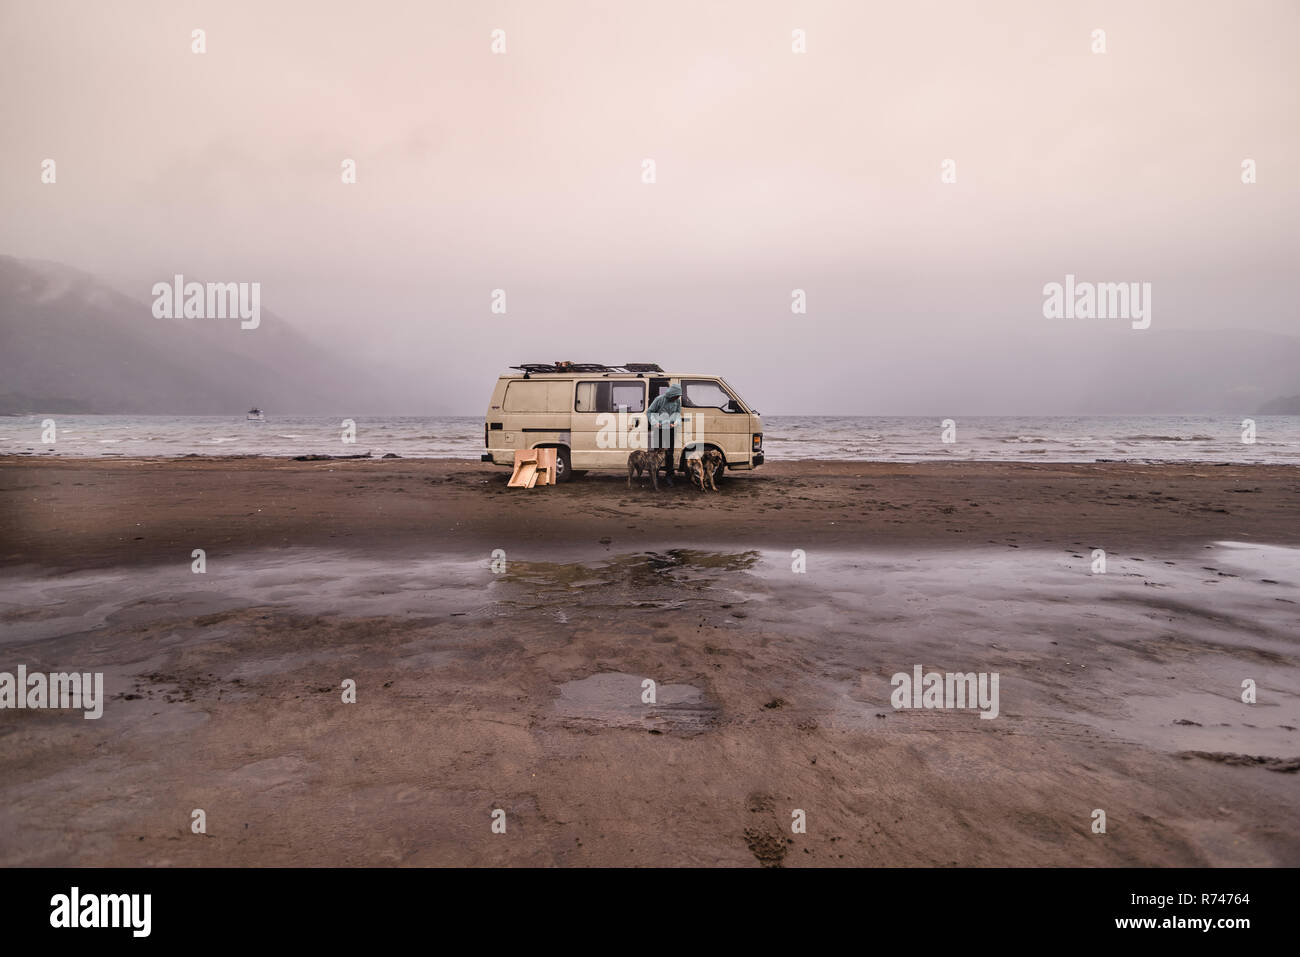 Woman and pet dogs by camper van on beach, Chile Stock Photo